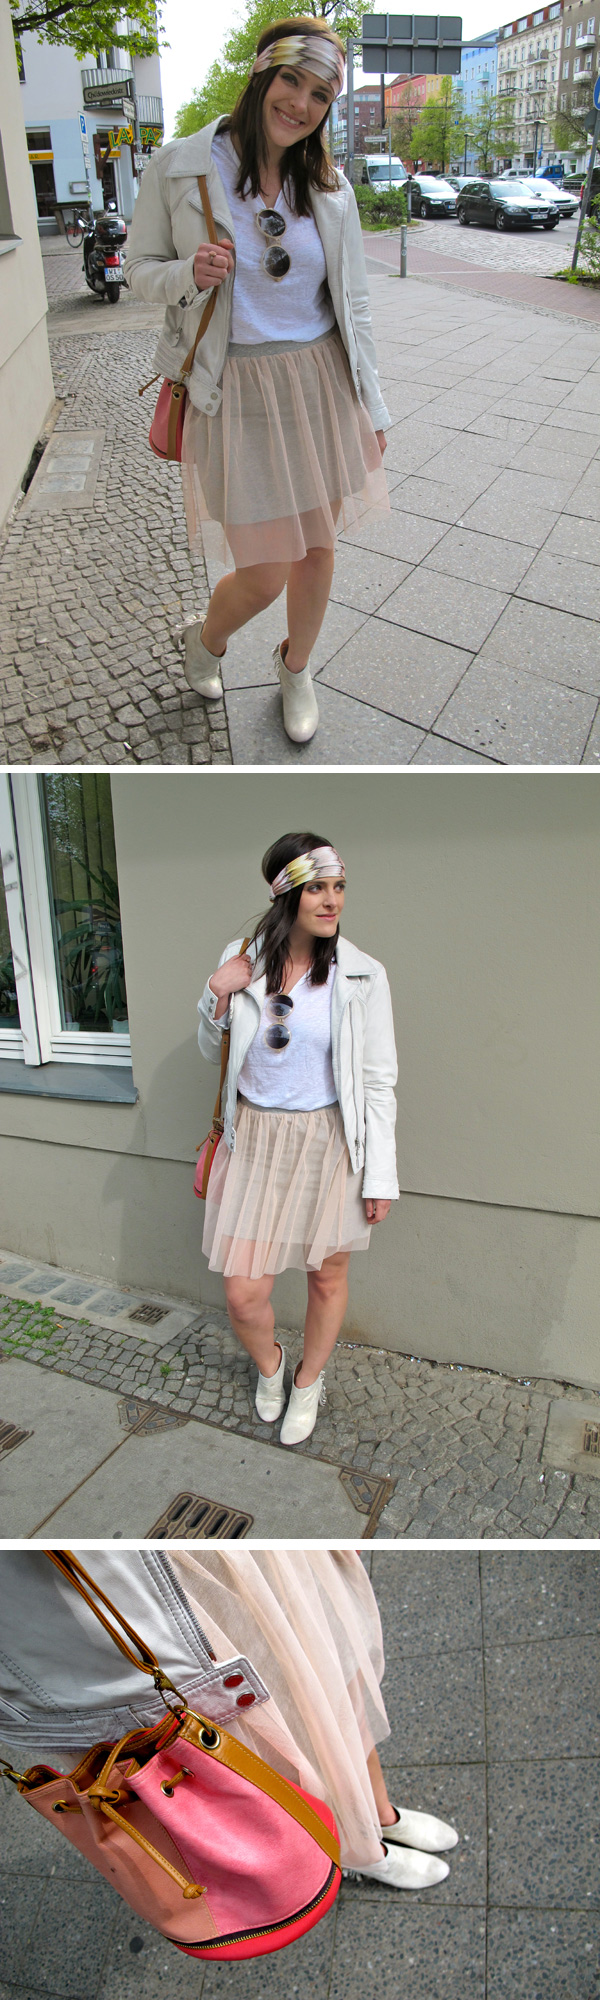 Ostern-Outfit-Fashion